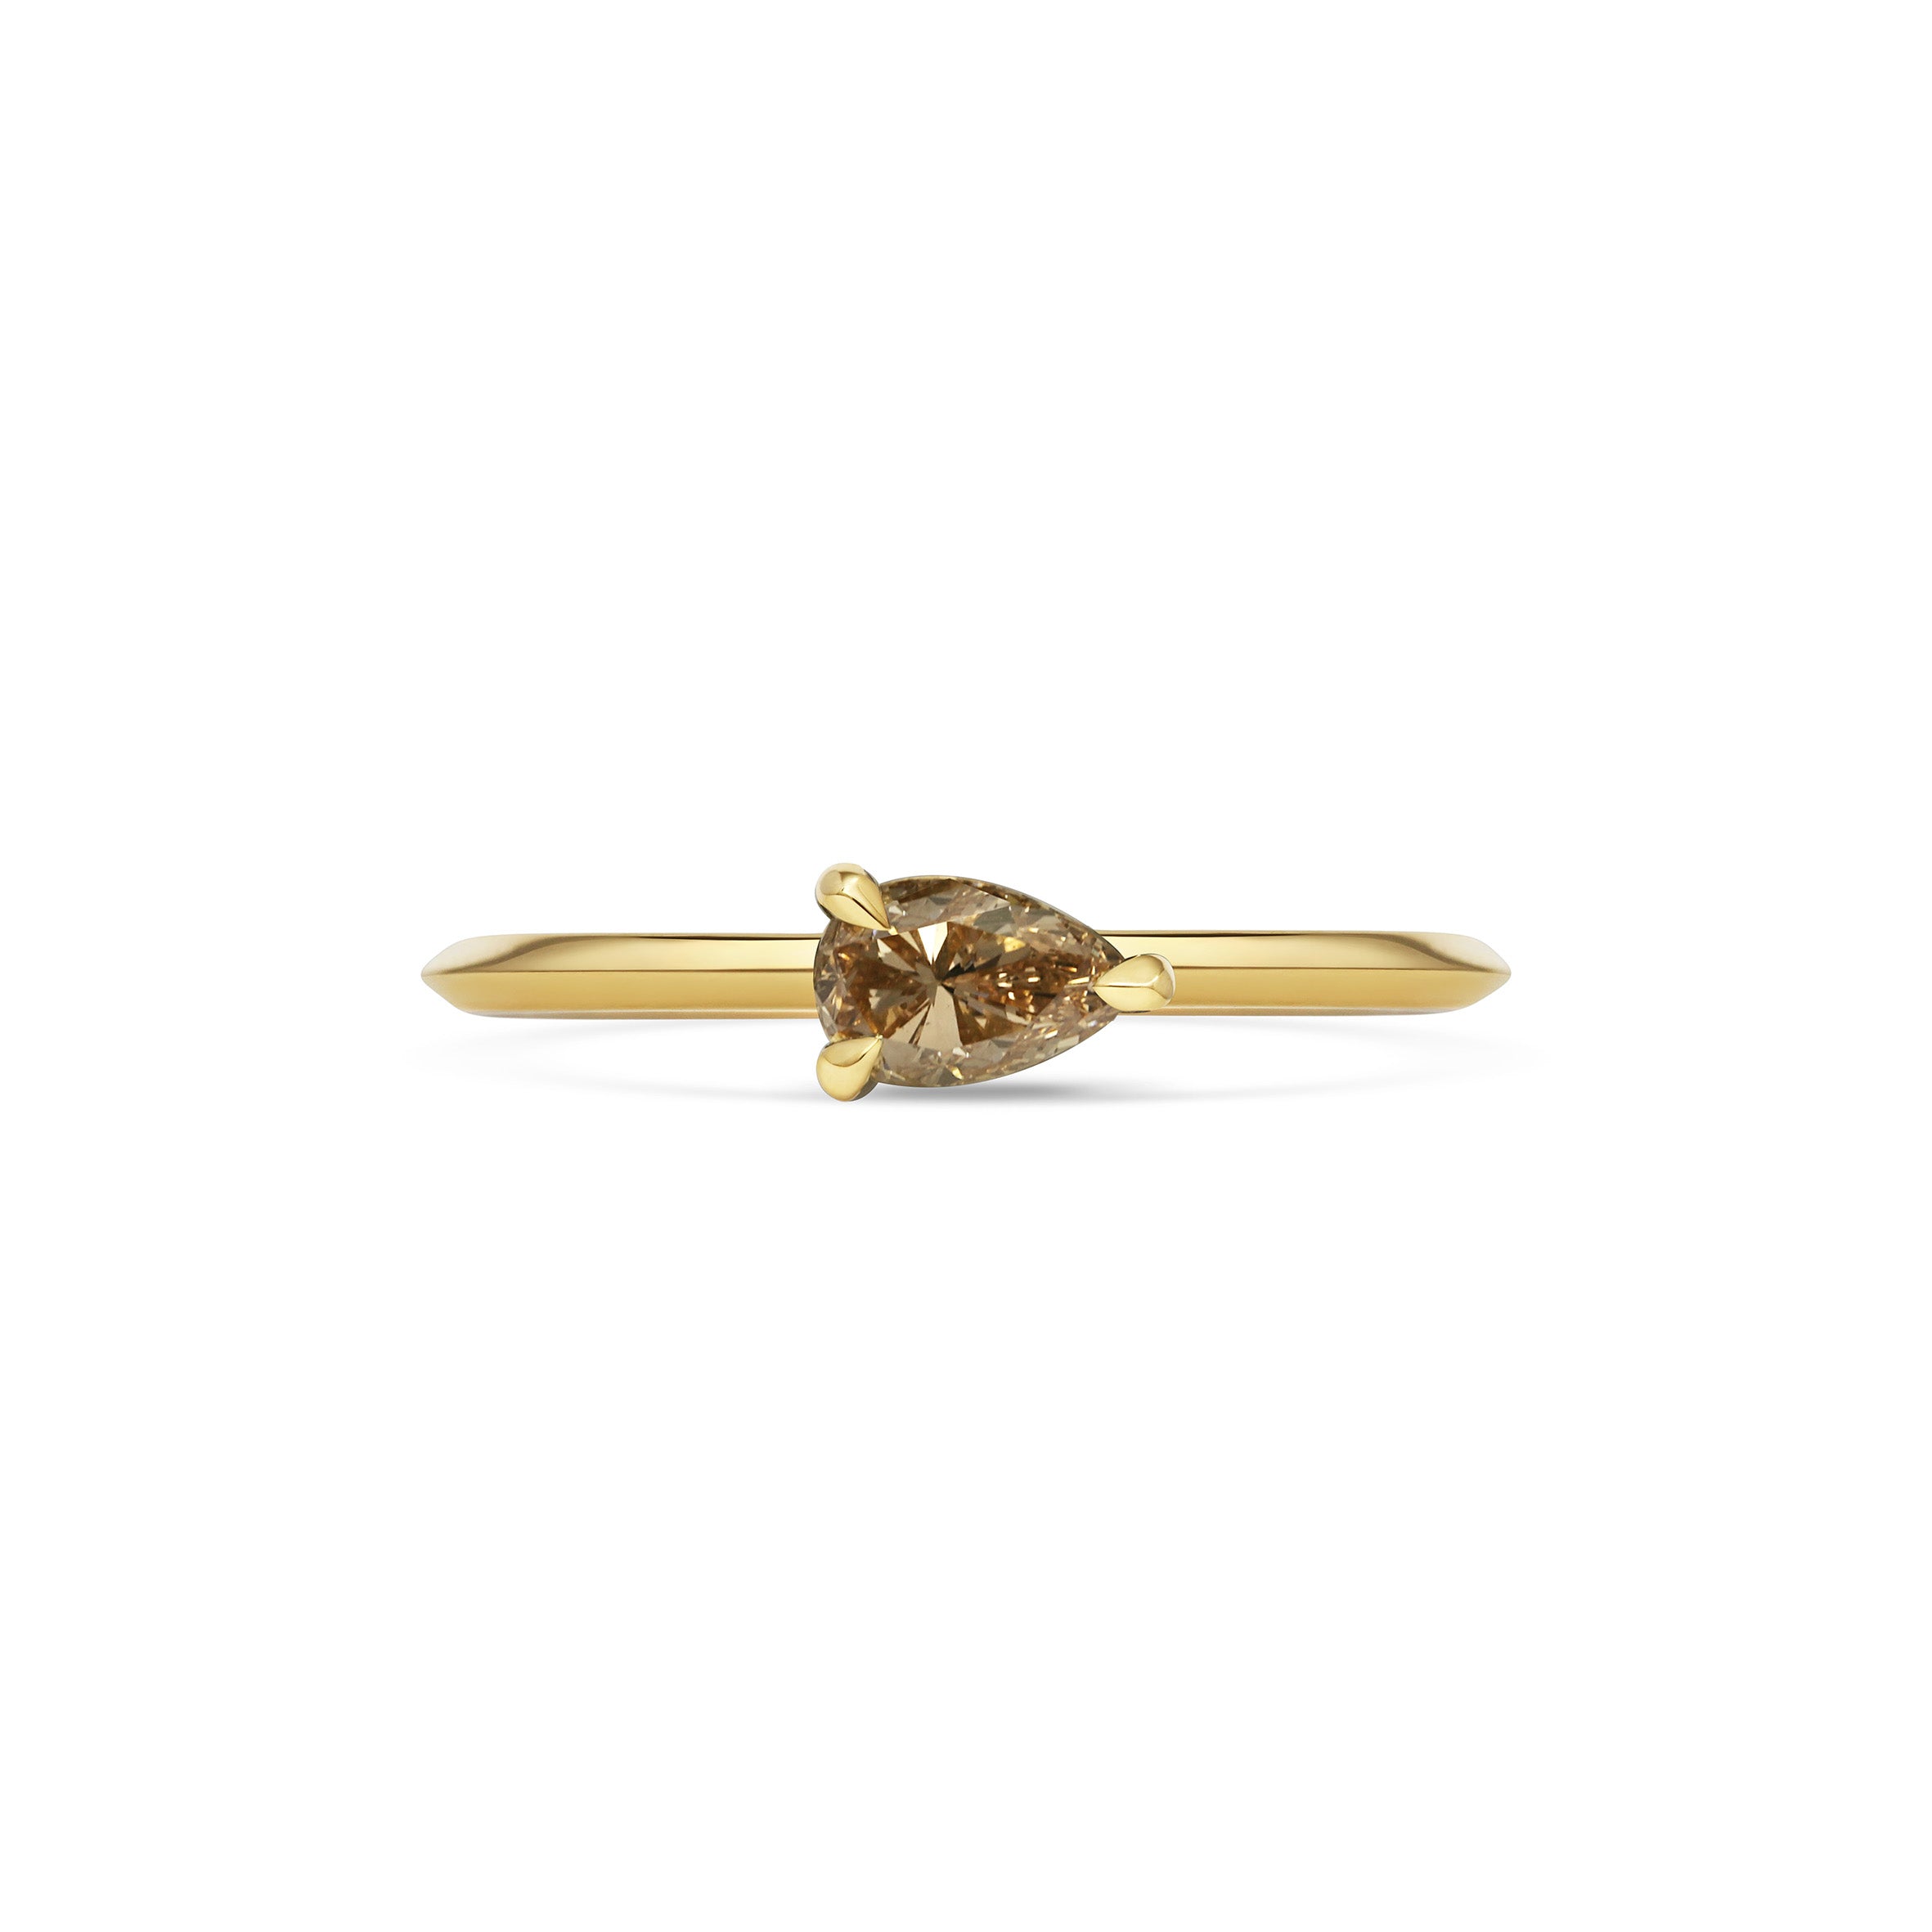 The Reims Ring by East London jeweller Rachel Boston | Discover our collections of unique and timeless engagement rings, wedding rings, and modern fine jewellery.